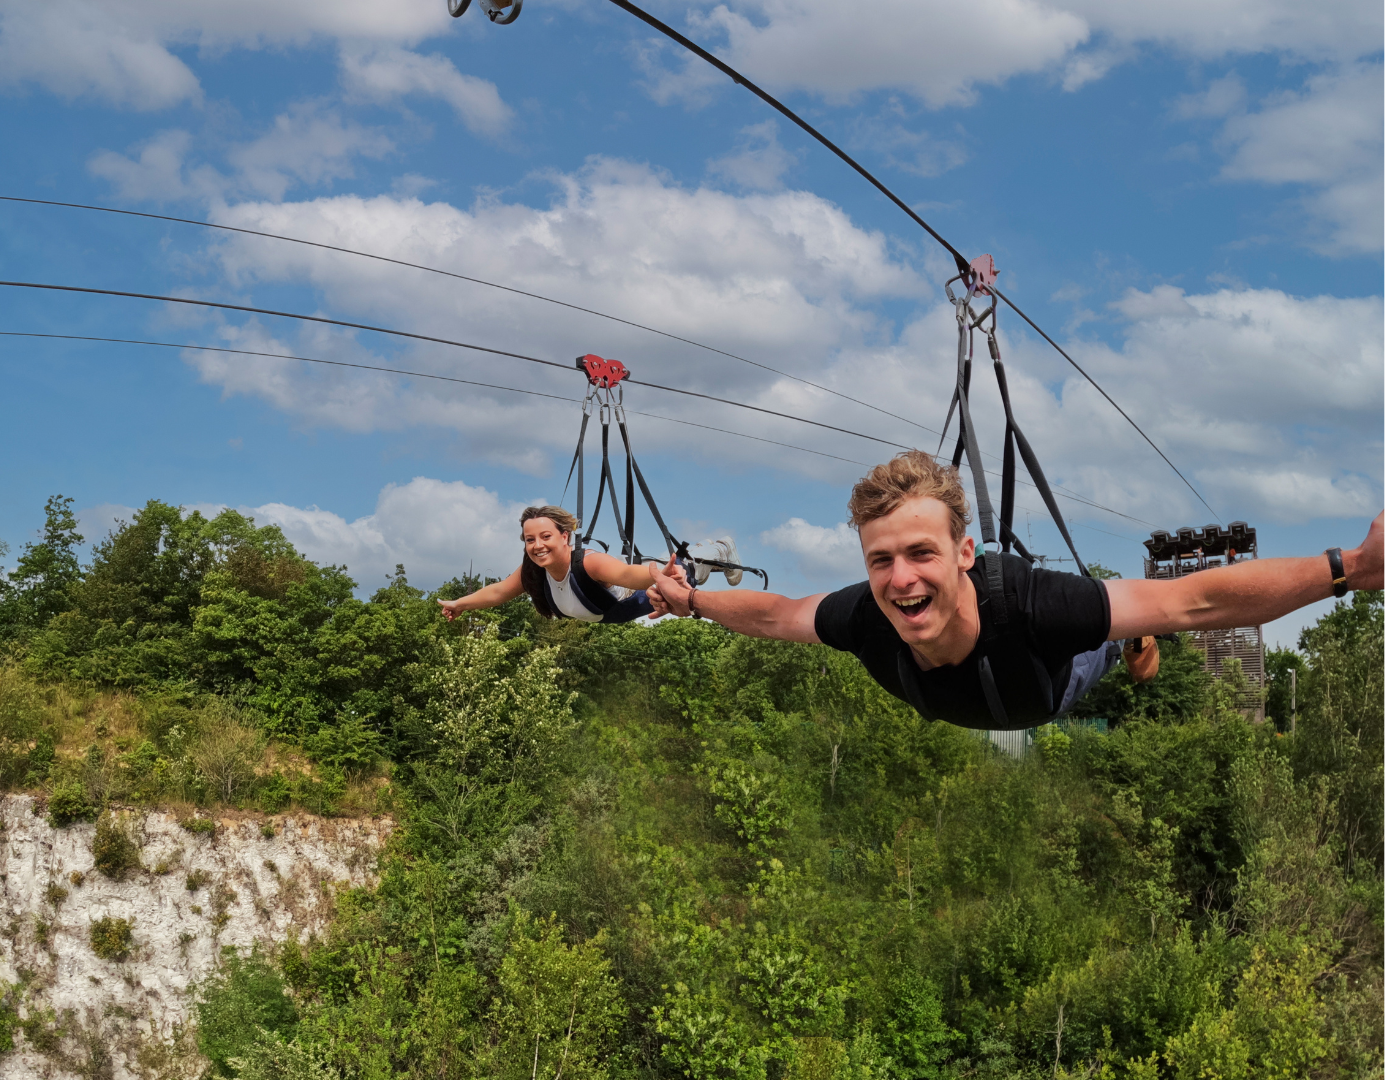 Young man and woman on a zipline